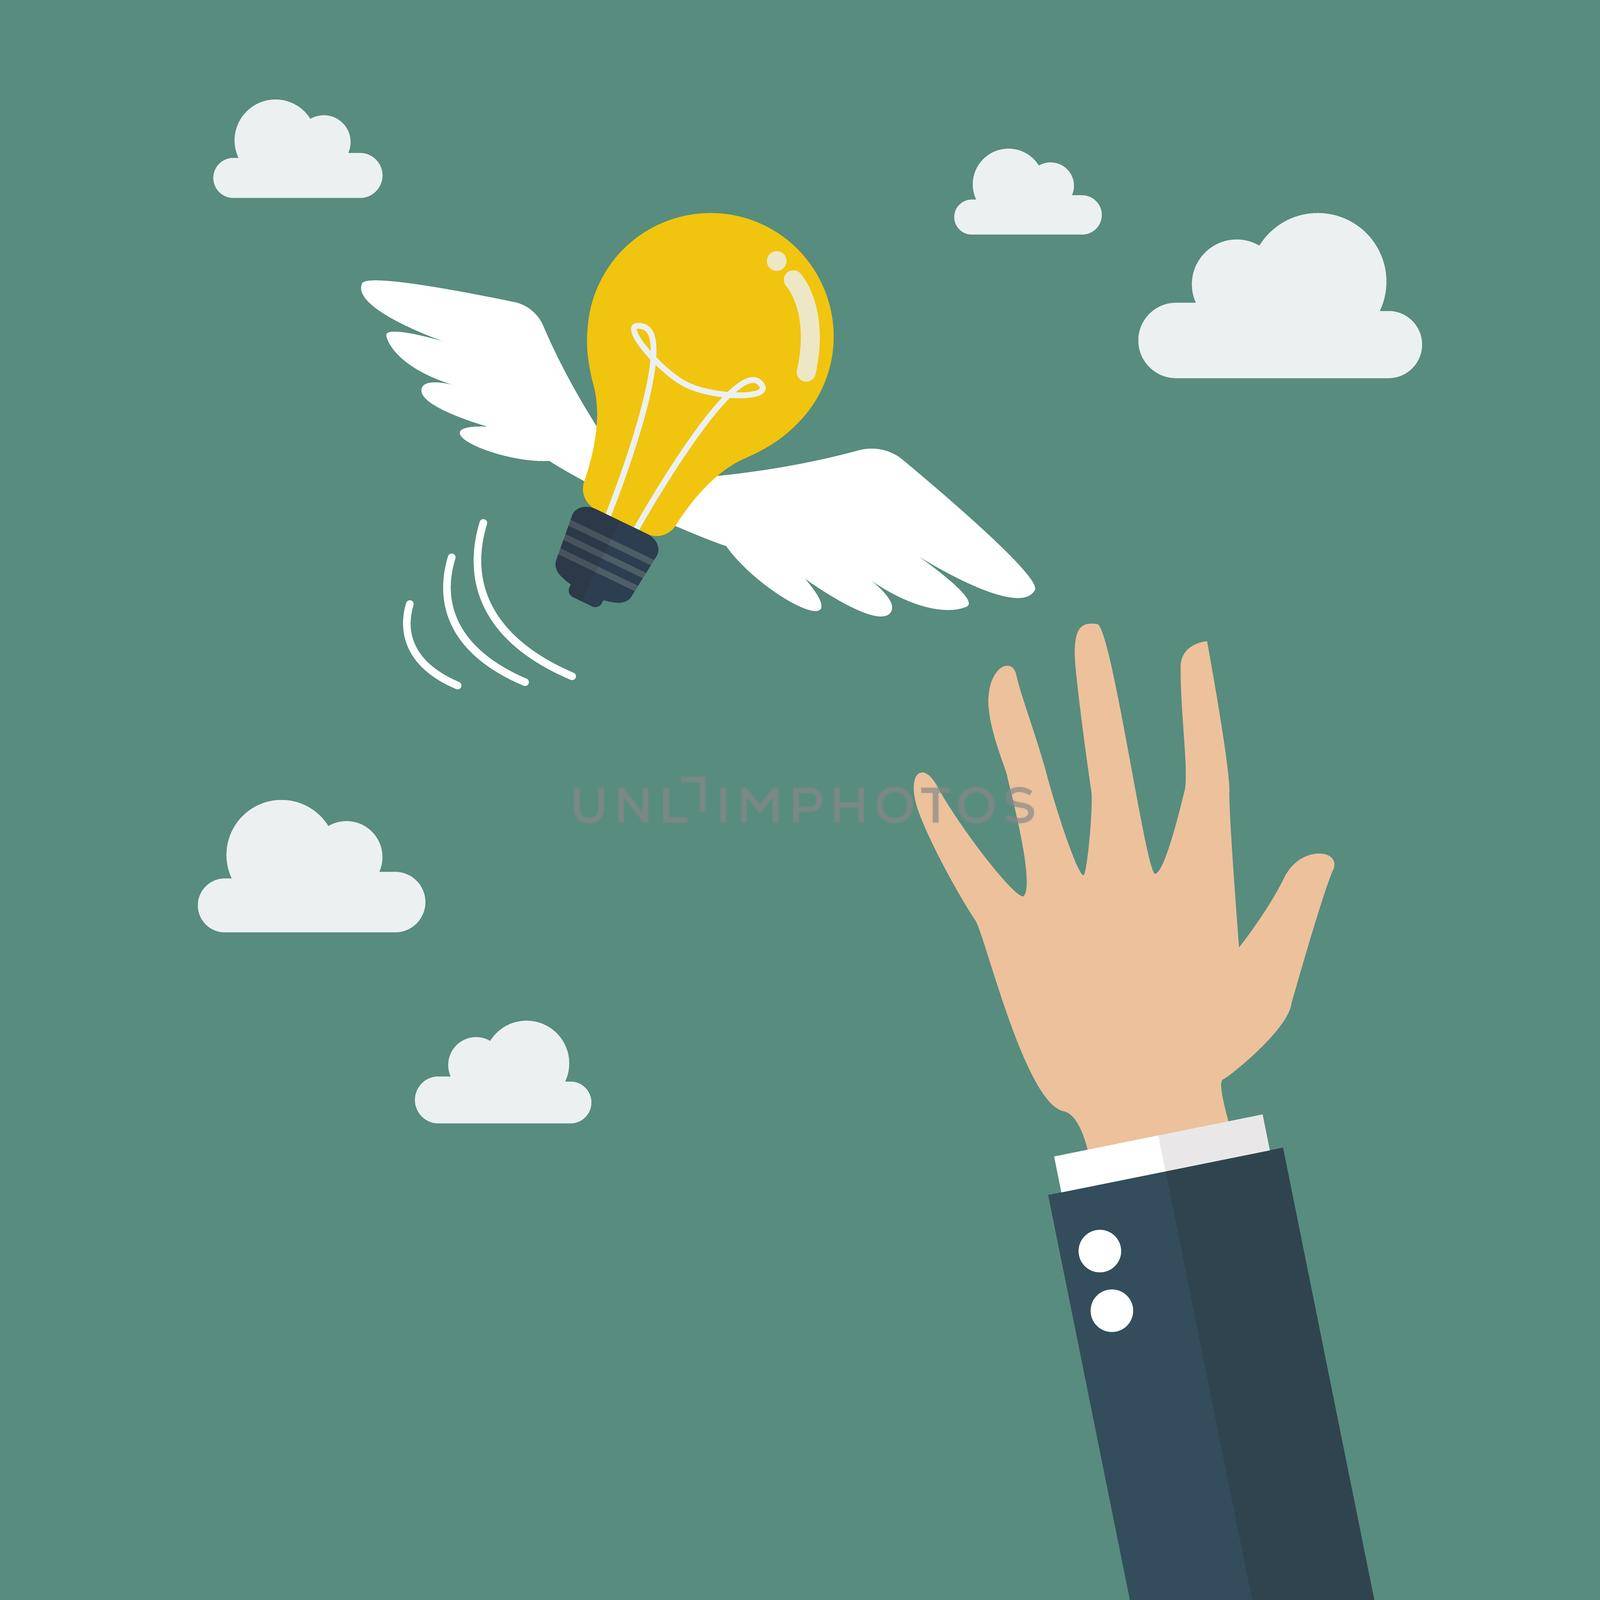 Hand catching a light bulb fly. Business concept